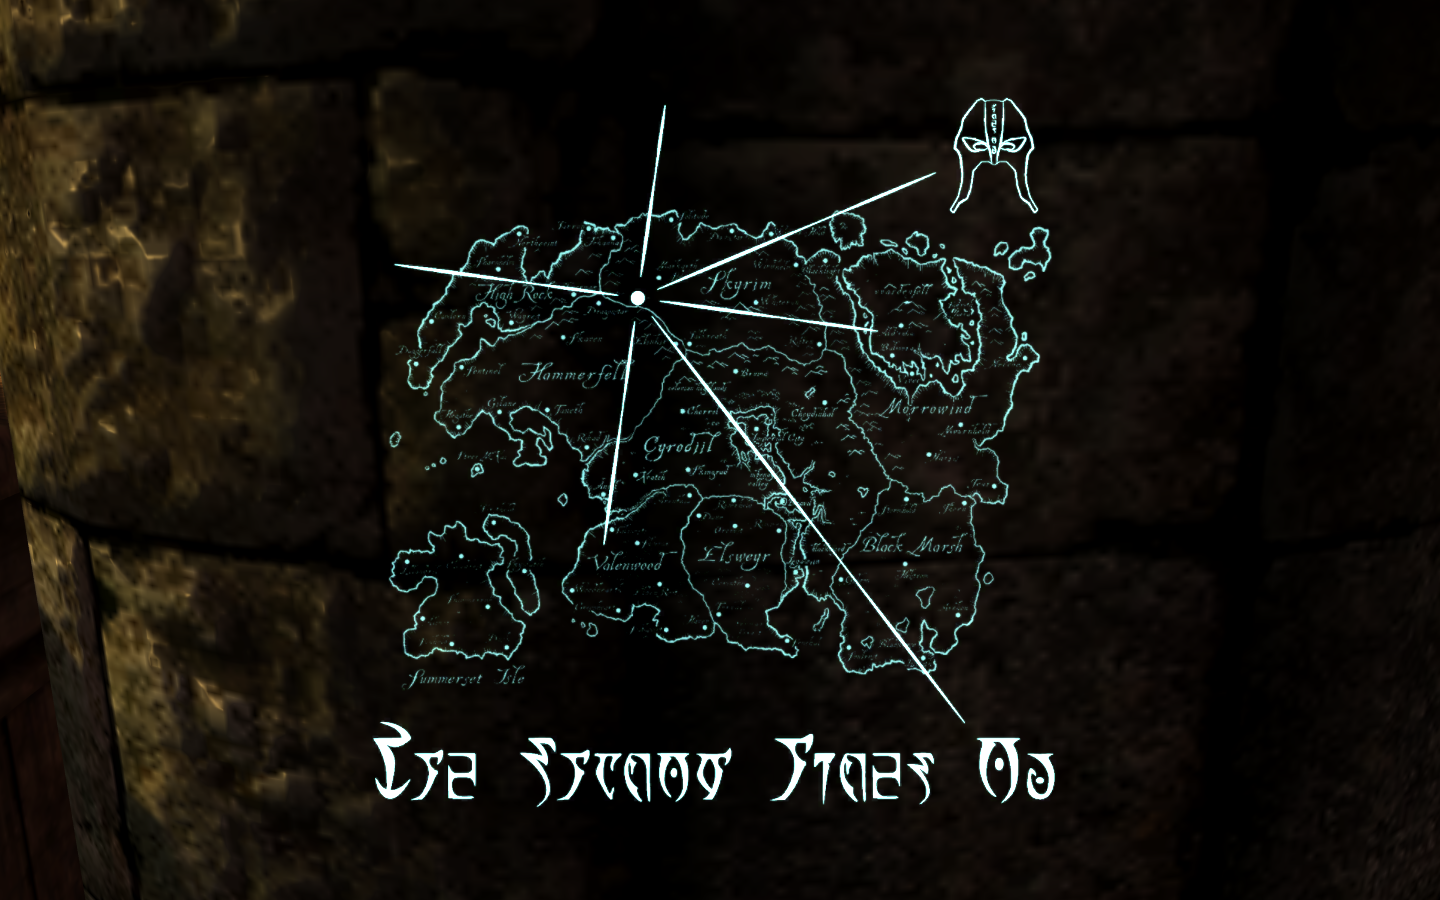 category-skyrim-the-gray-cowl-of-nocturnal-quests-the-elder-scrolls-mods-wiki-fandom